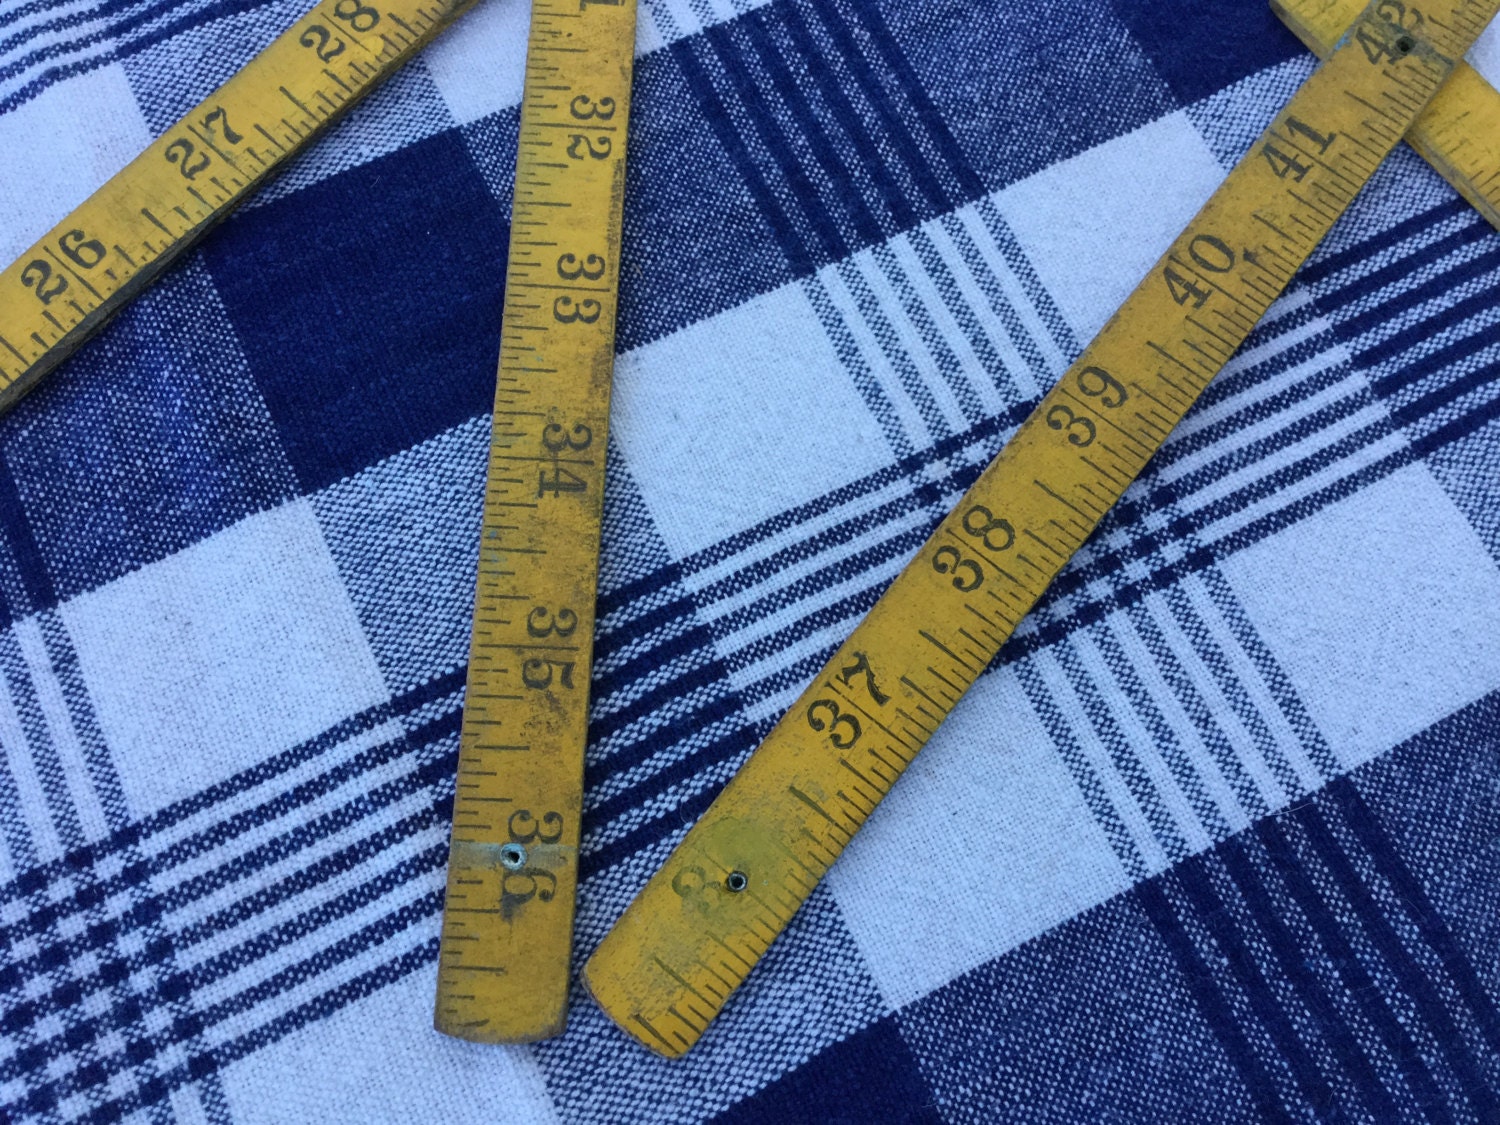 Ruler, foldable, hinged, vintage from ScrappierSisters on Etsy Studio